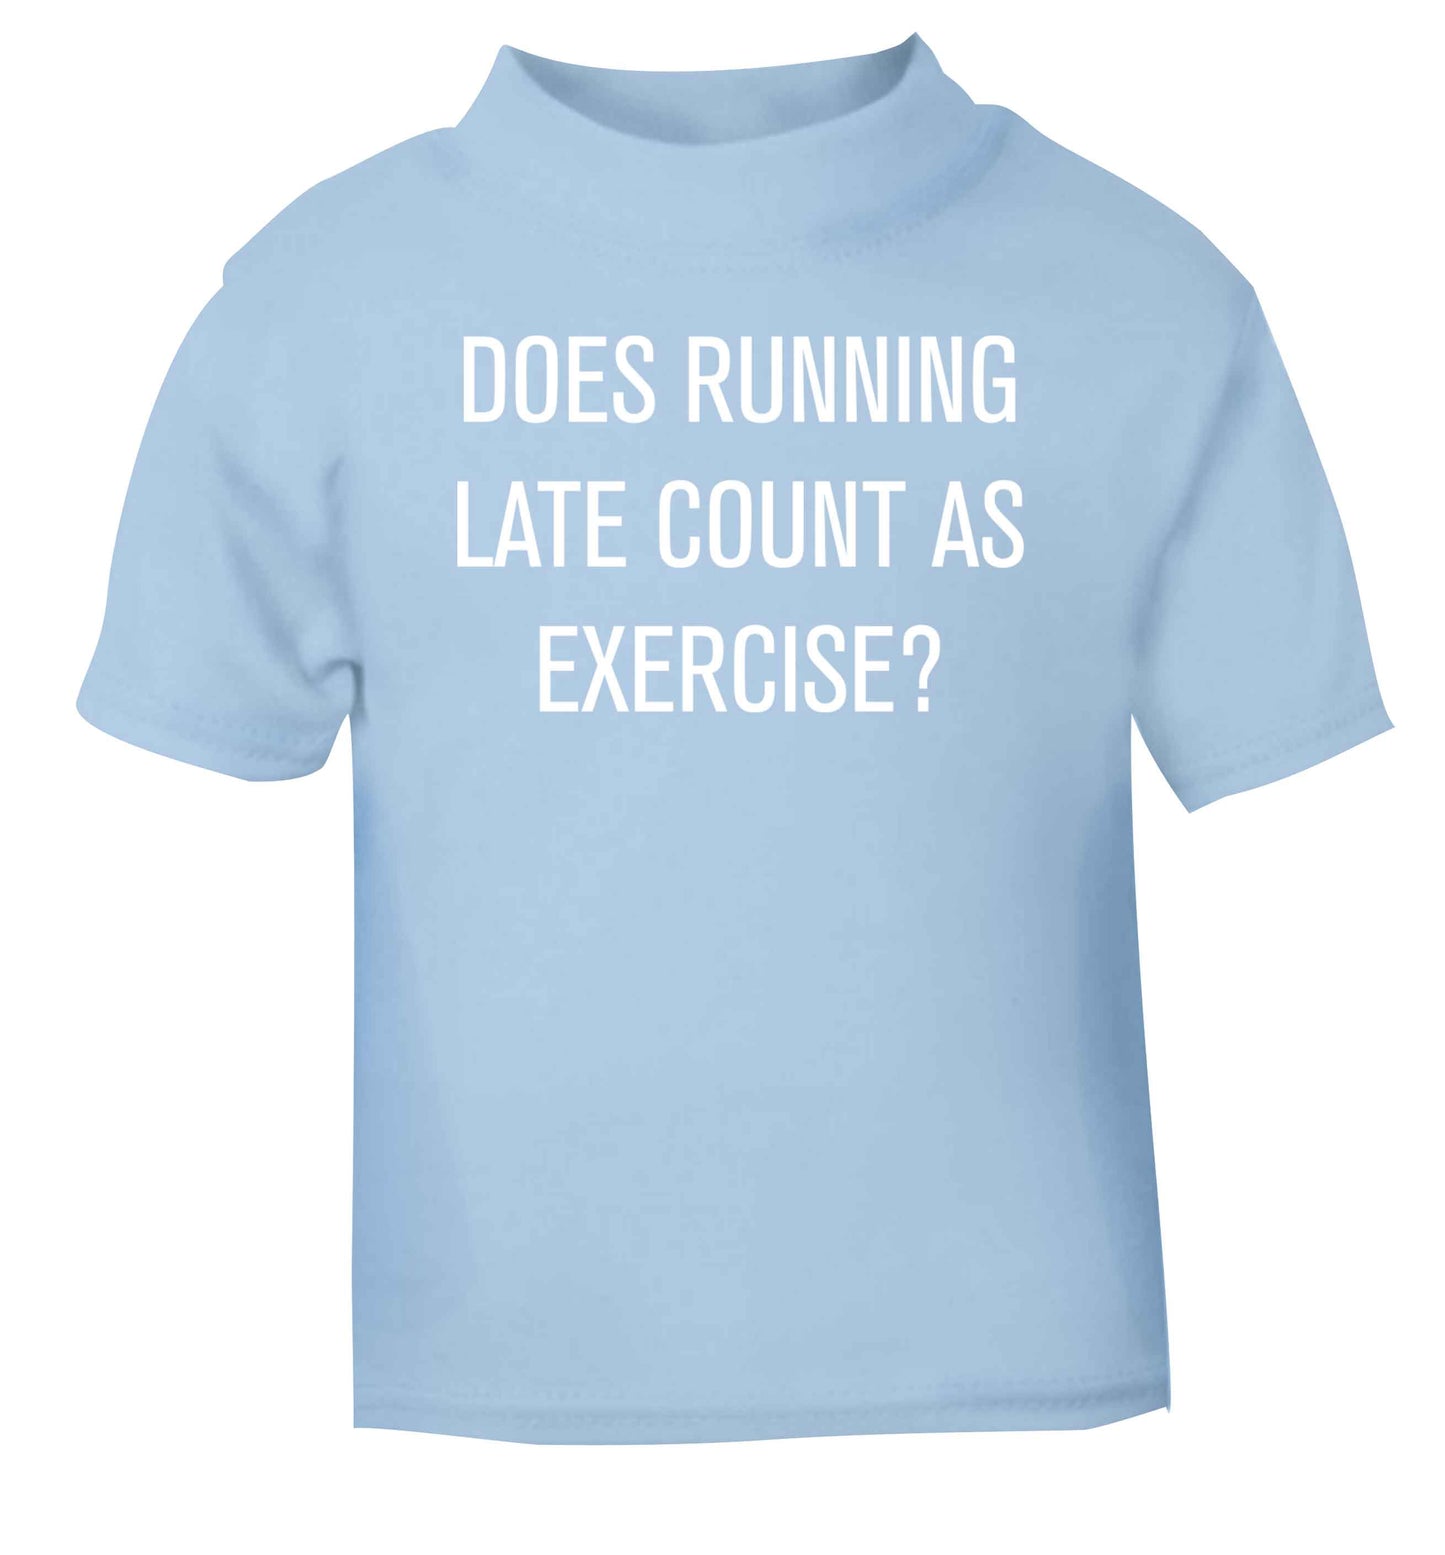 Does running late count as exercise? light blue baby toddler Tshirt 2 Years